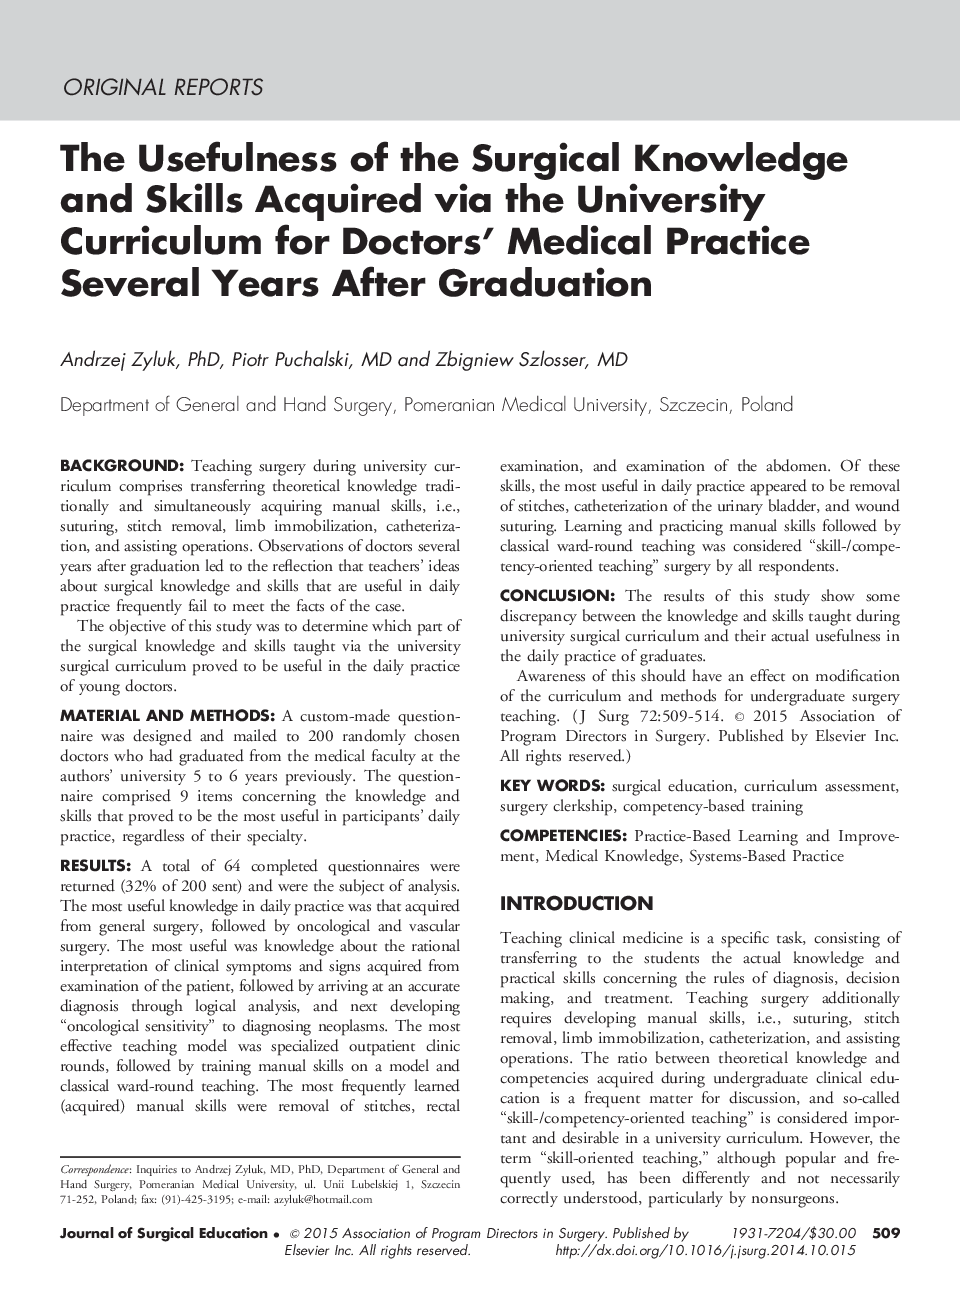 The Usefulness of the Surgical Knowledge and Skills Acquired via the University Curriculum for Doctors’ Medical Practice Several Years After Graduation